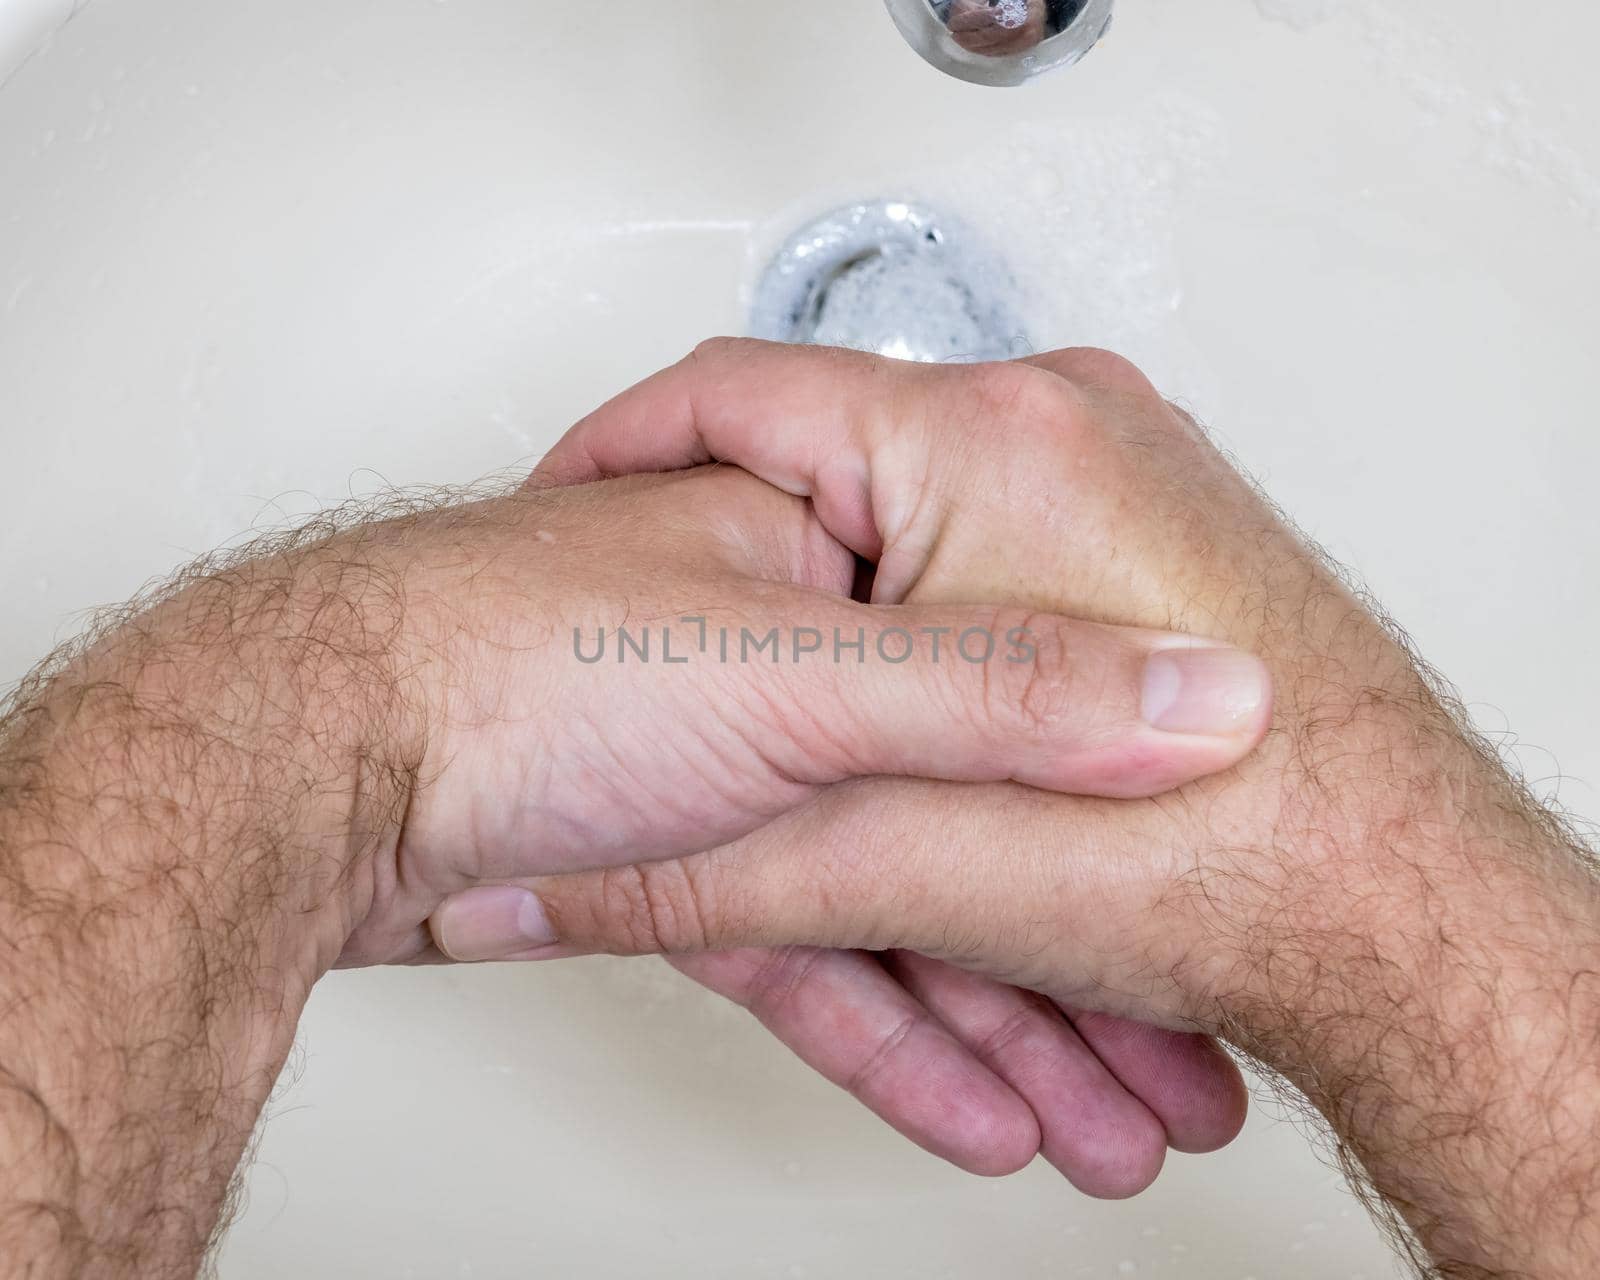 Man washing hands close-up from above by imagesbykenny